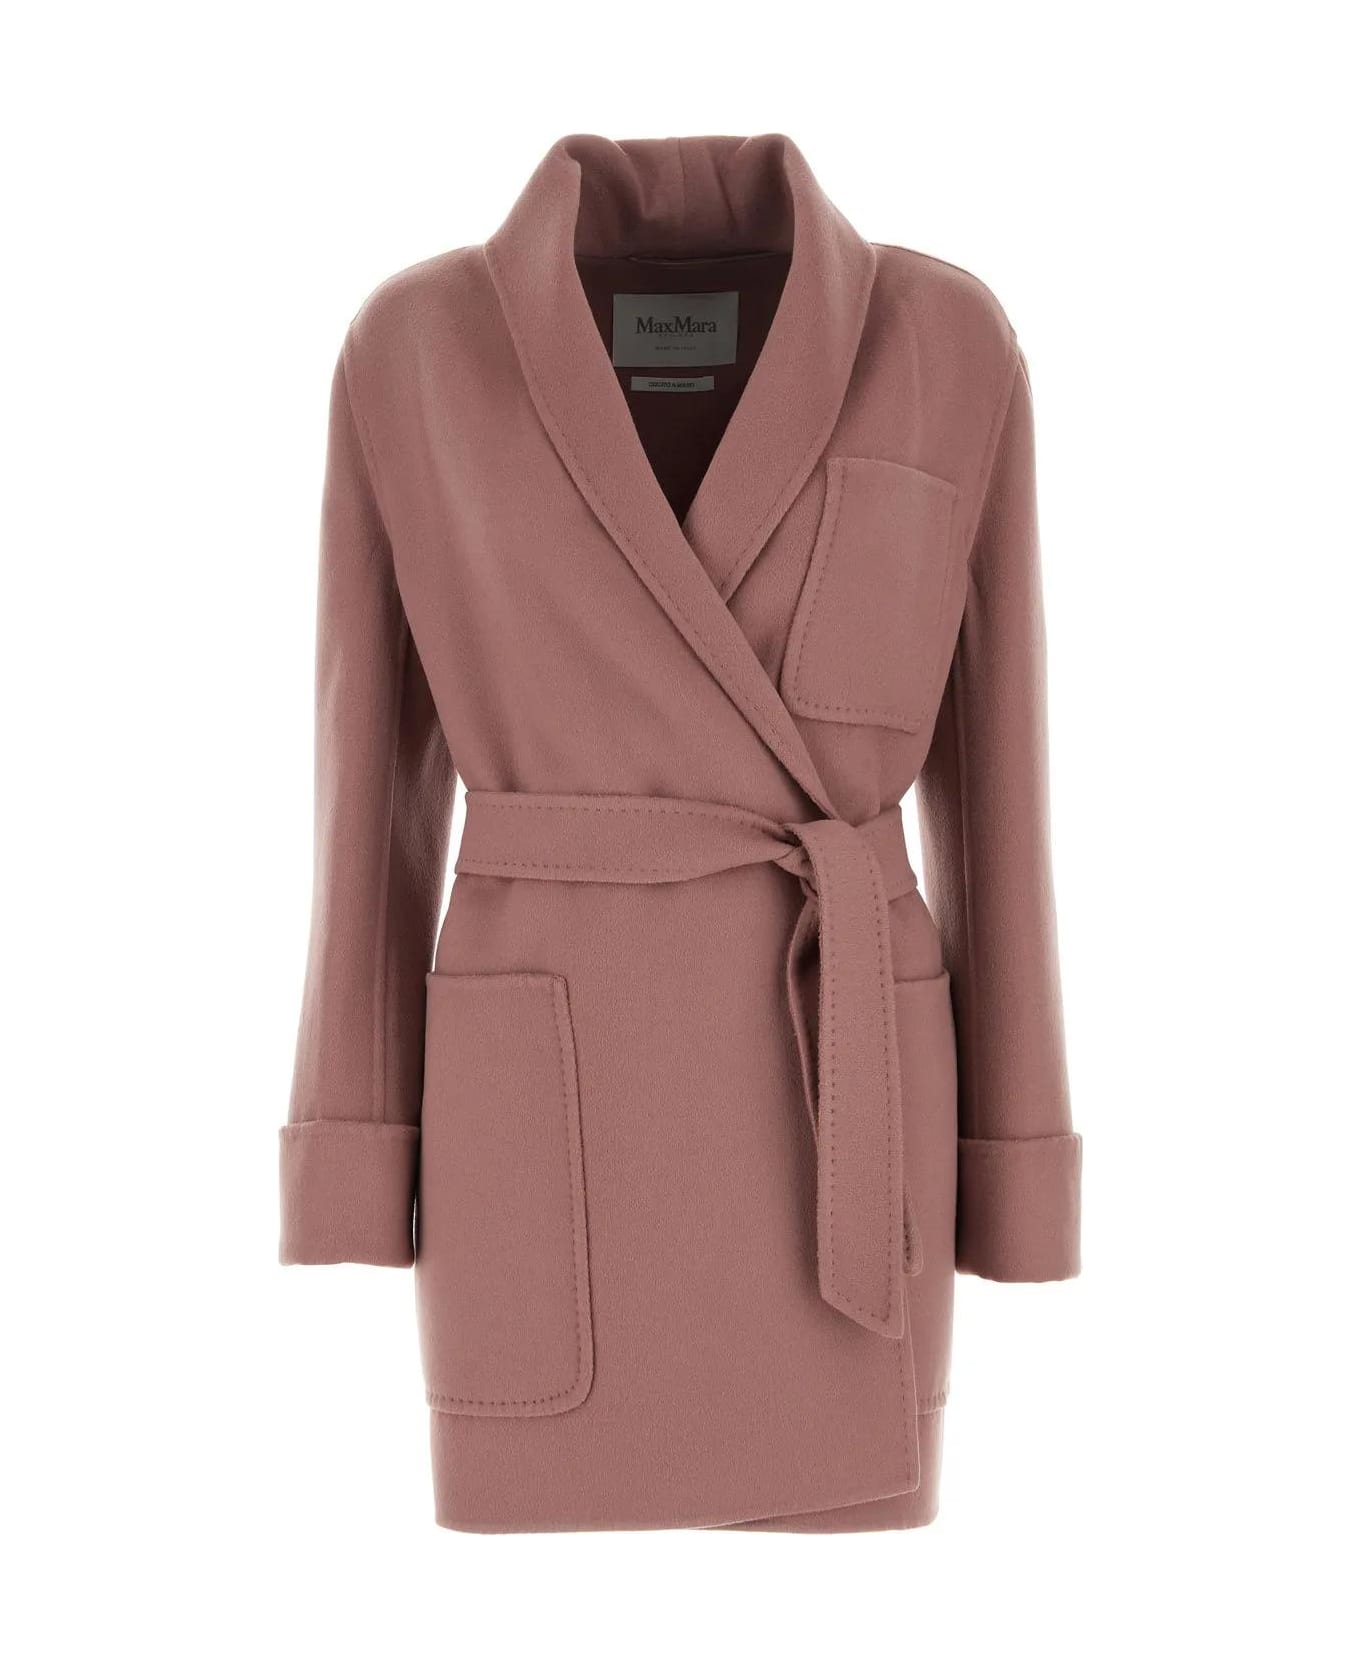 Max Mara Deconstructed Jacket In Wool And Cashmere - ROSA